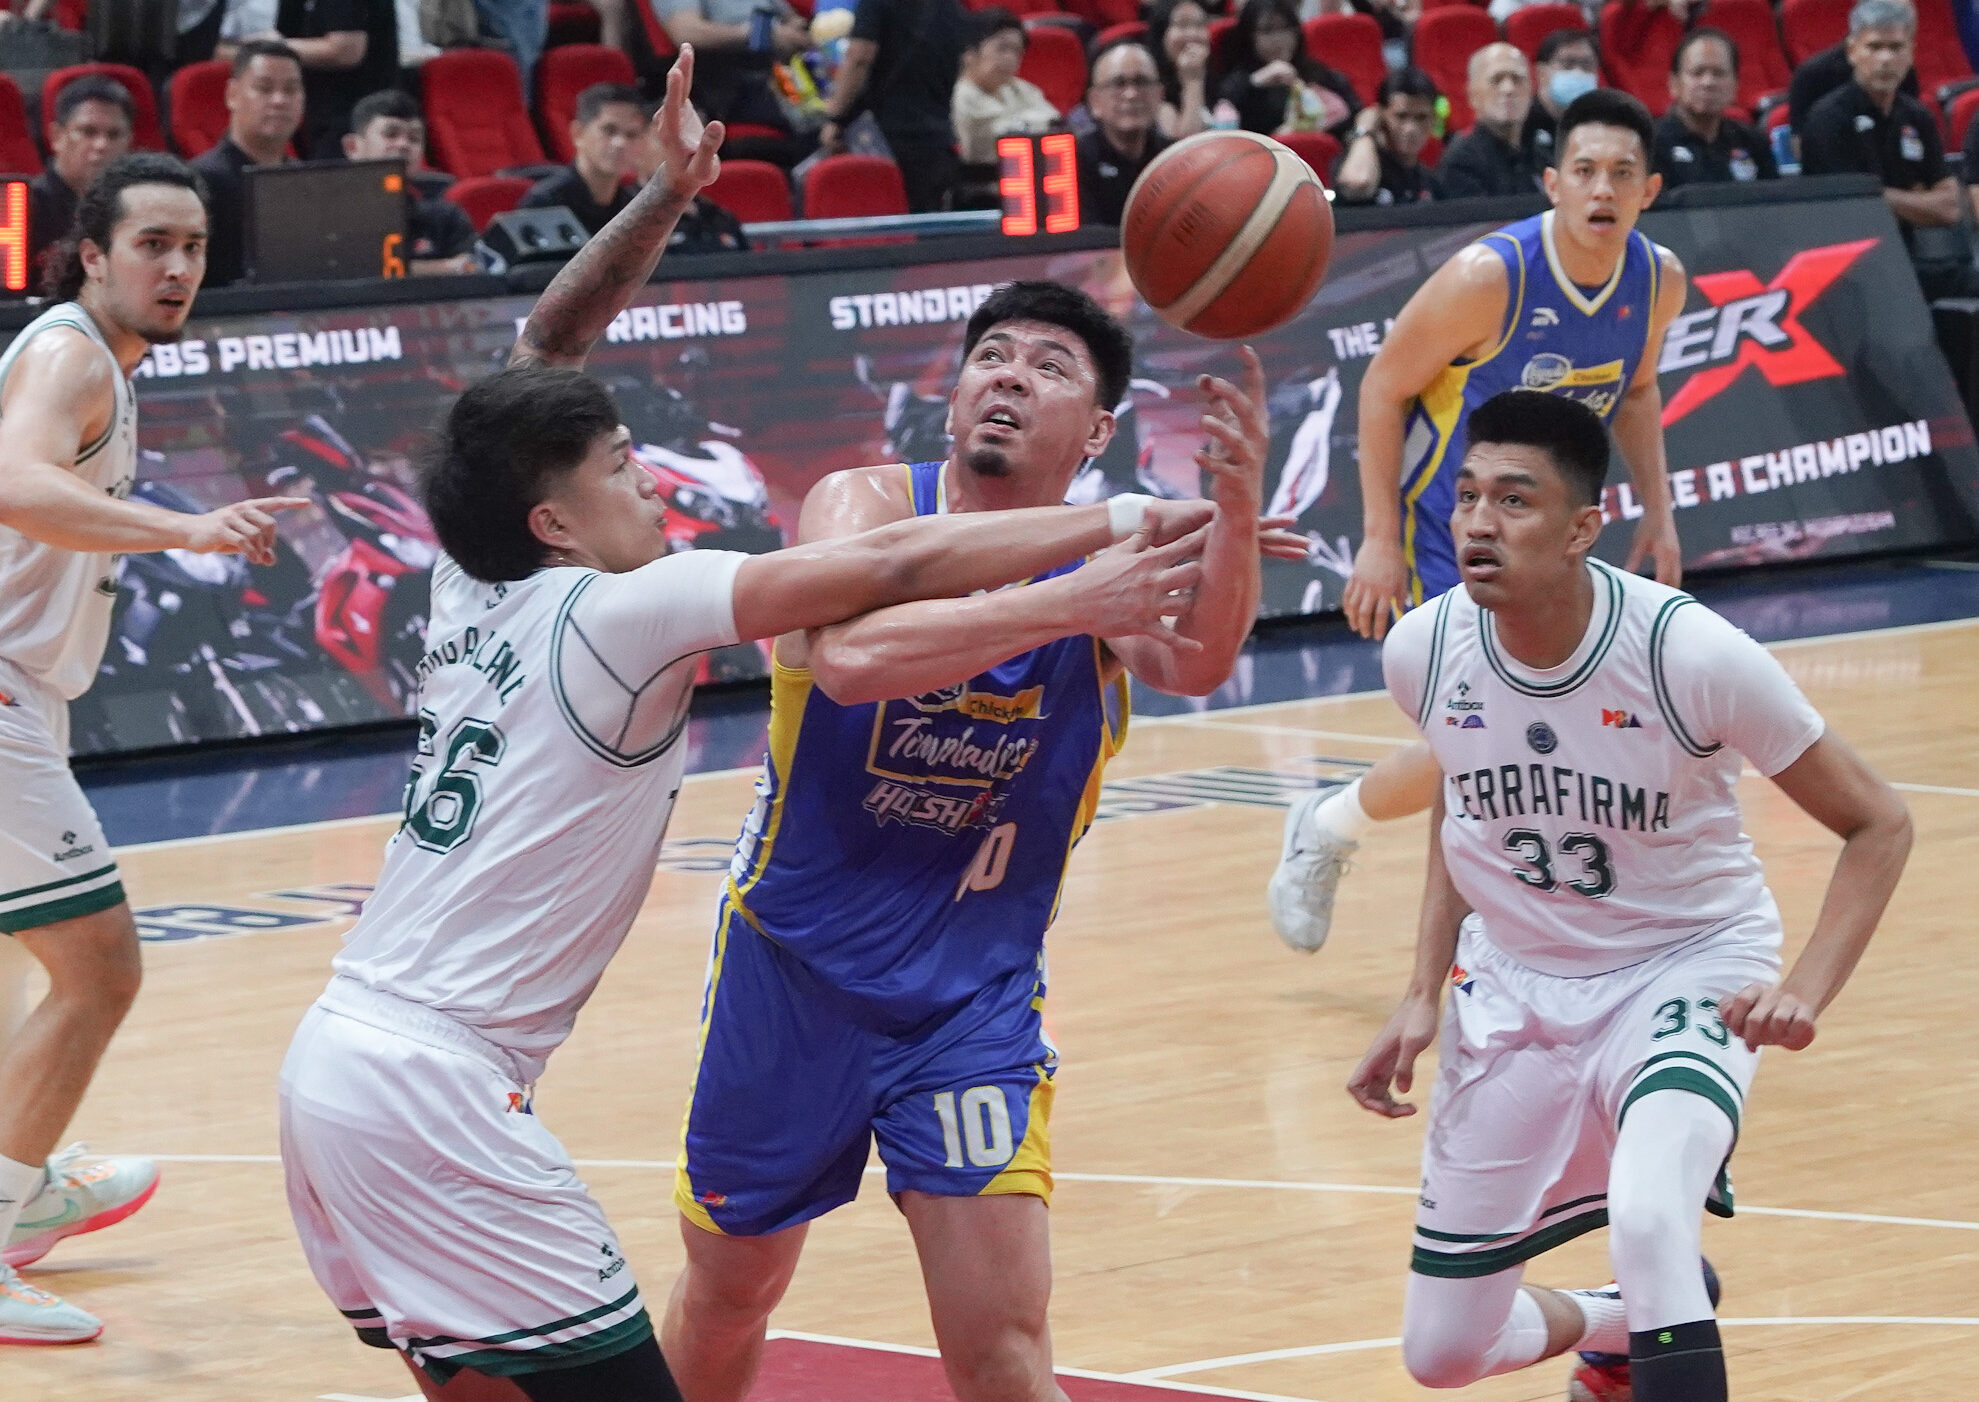 louie sangalang relishes matchup vs ian despite one-sided result